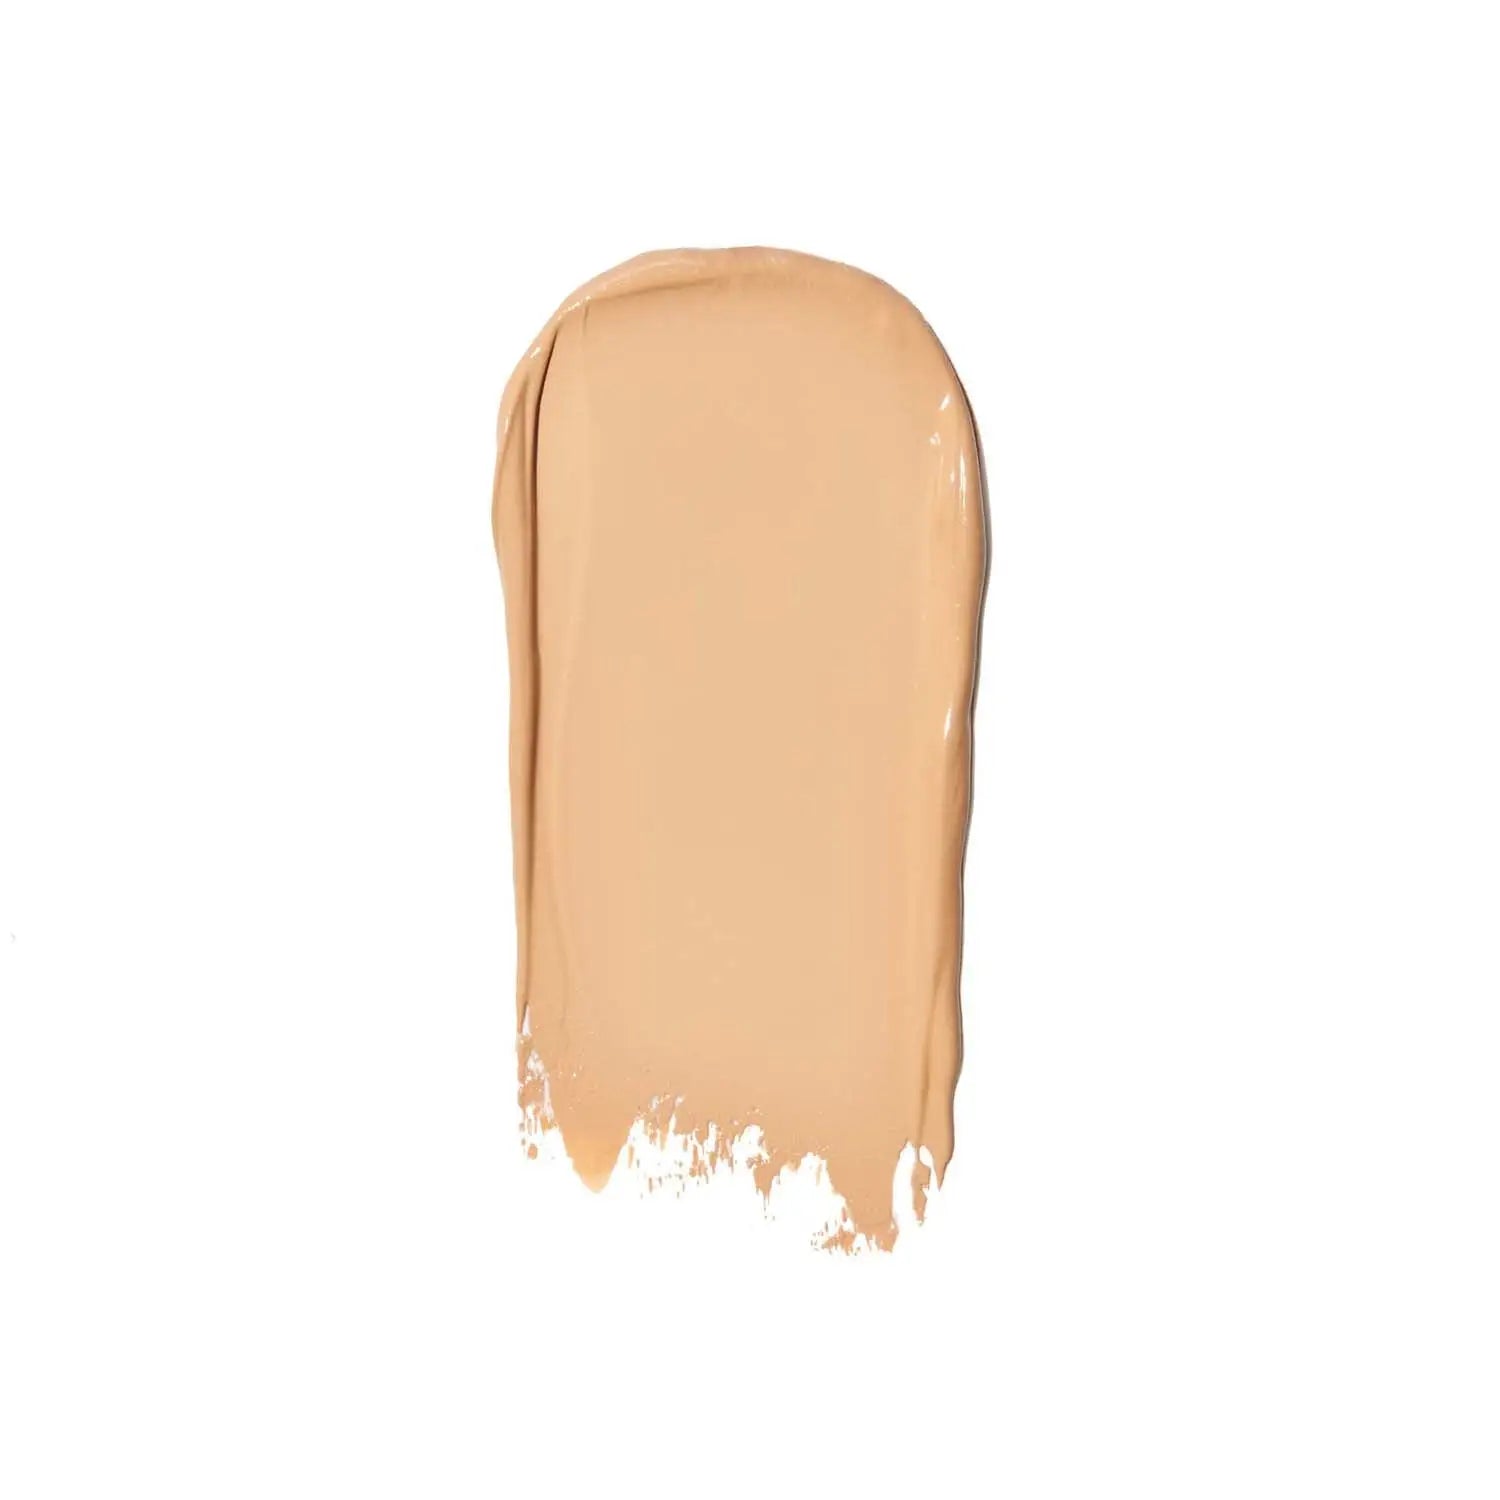 RMS Beauty Un' Cover-up Cream Foundation, 30ml - 66